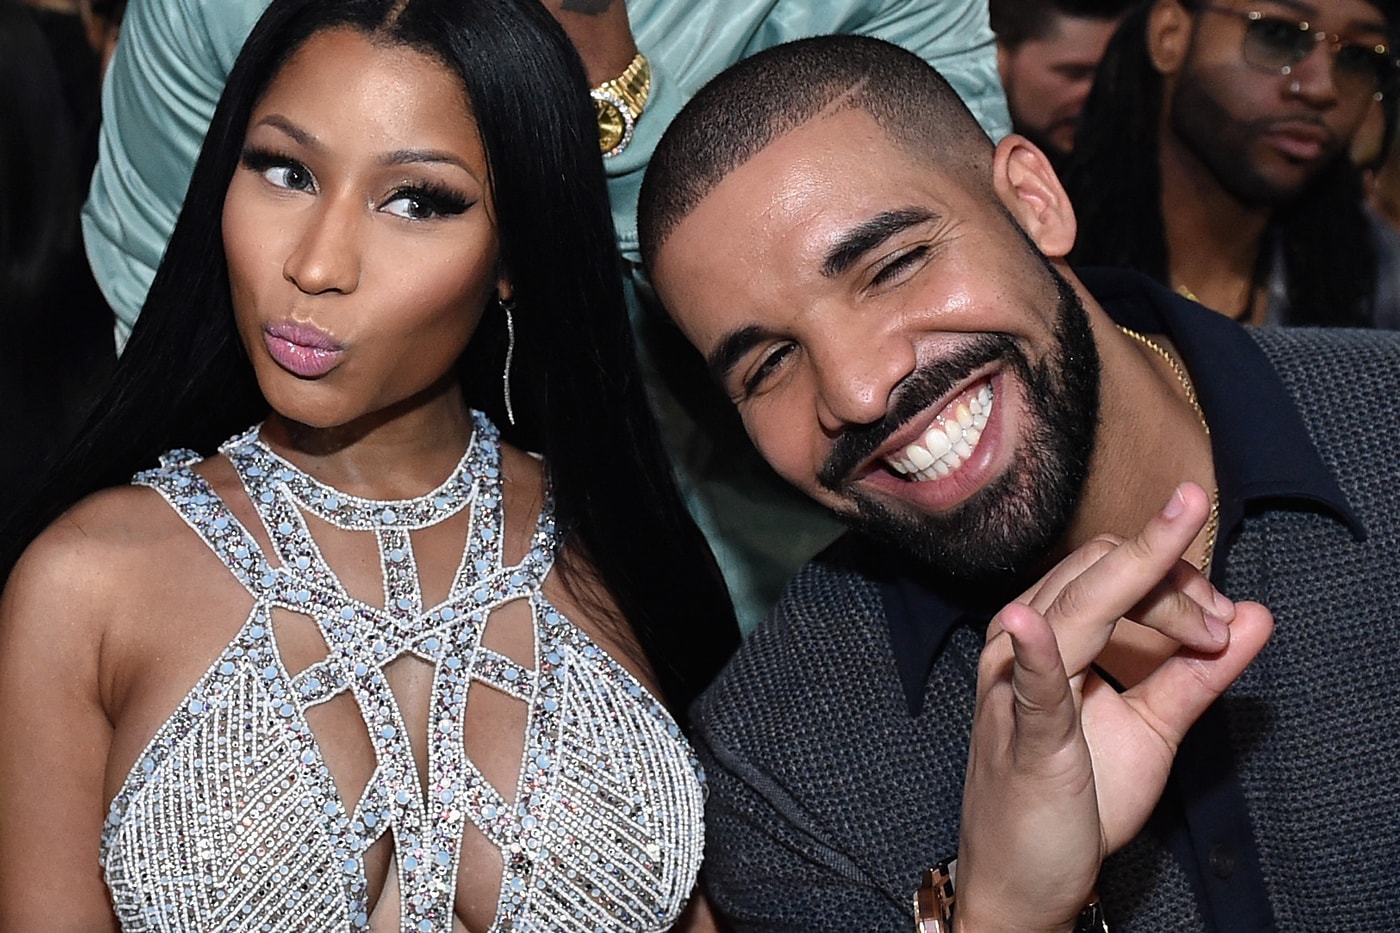 Nicki Minaj drake album For All the Dogs Feature Confirmed